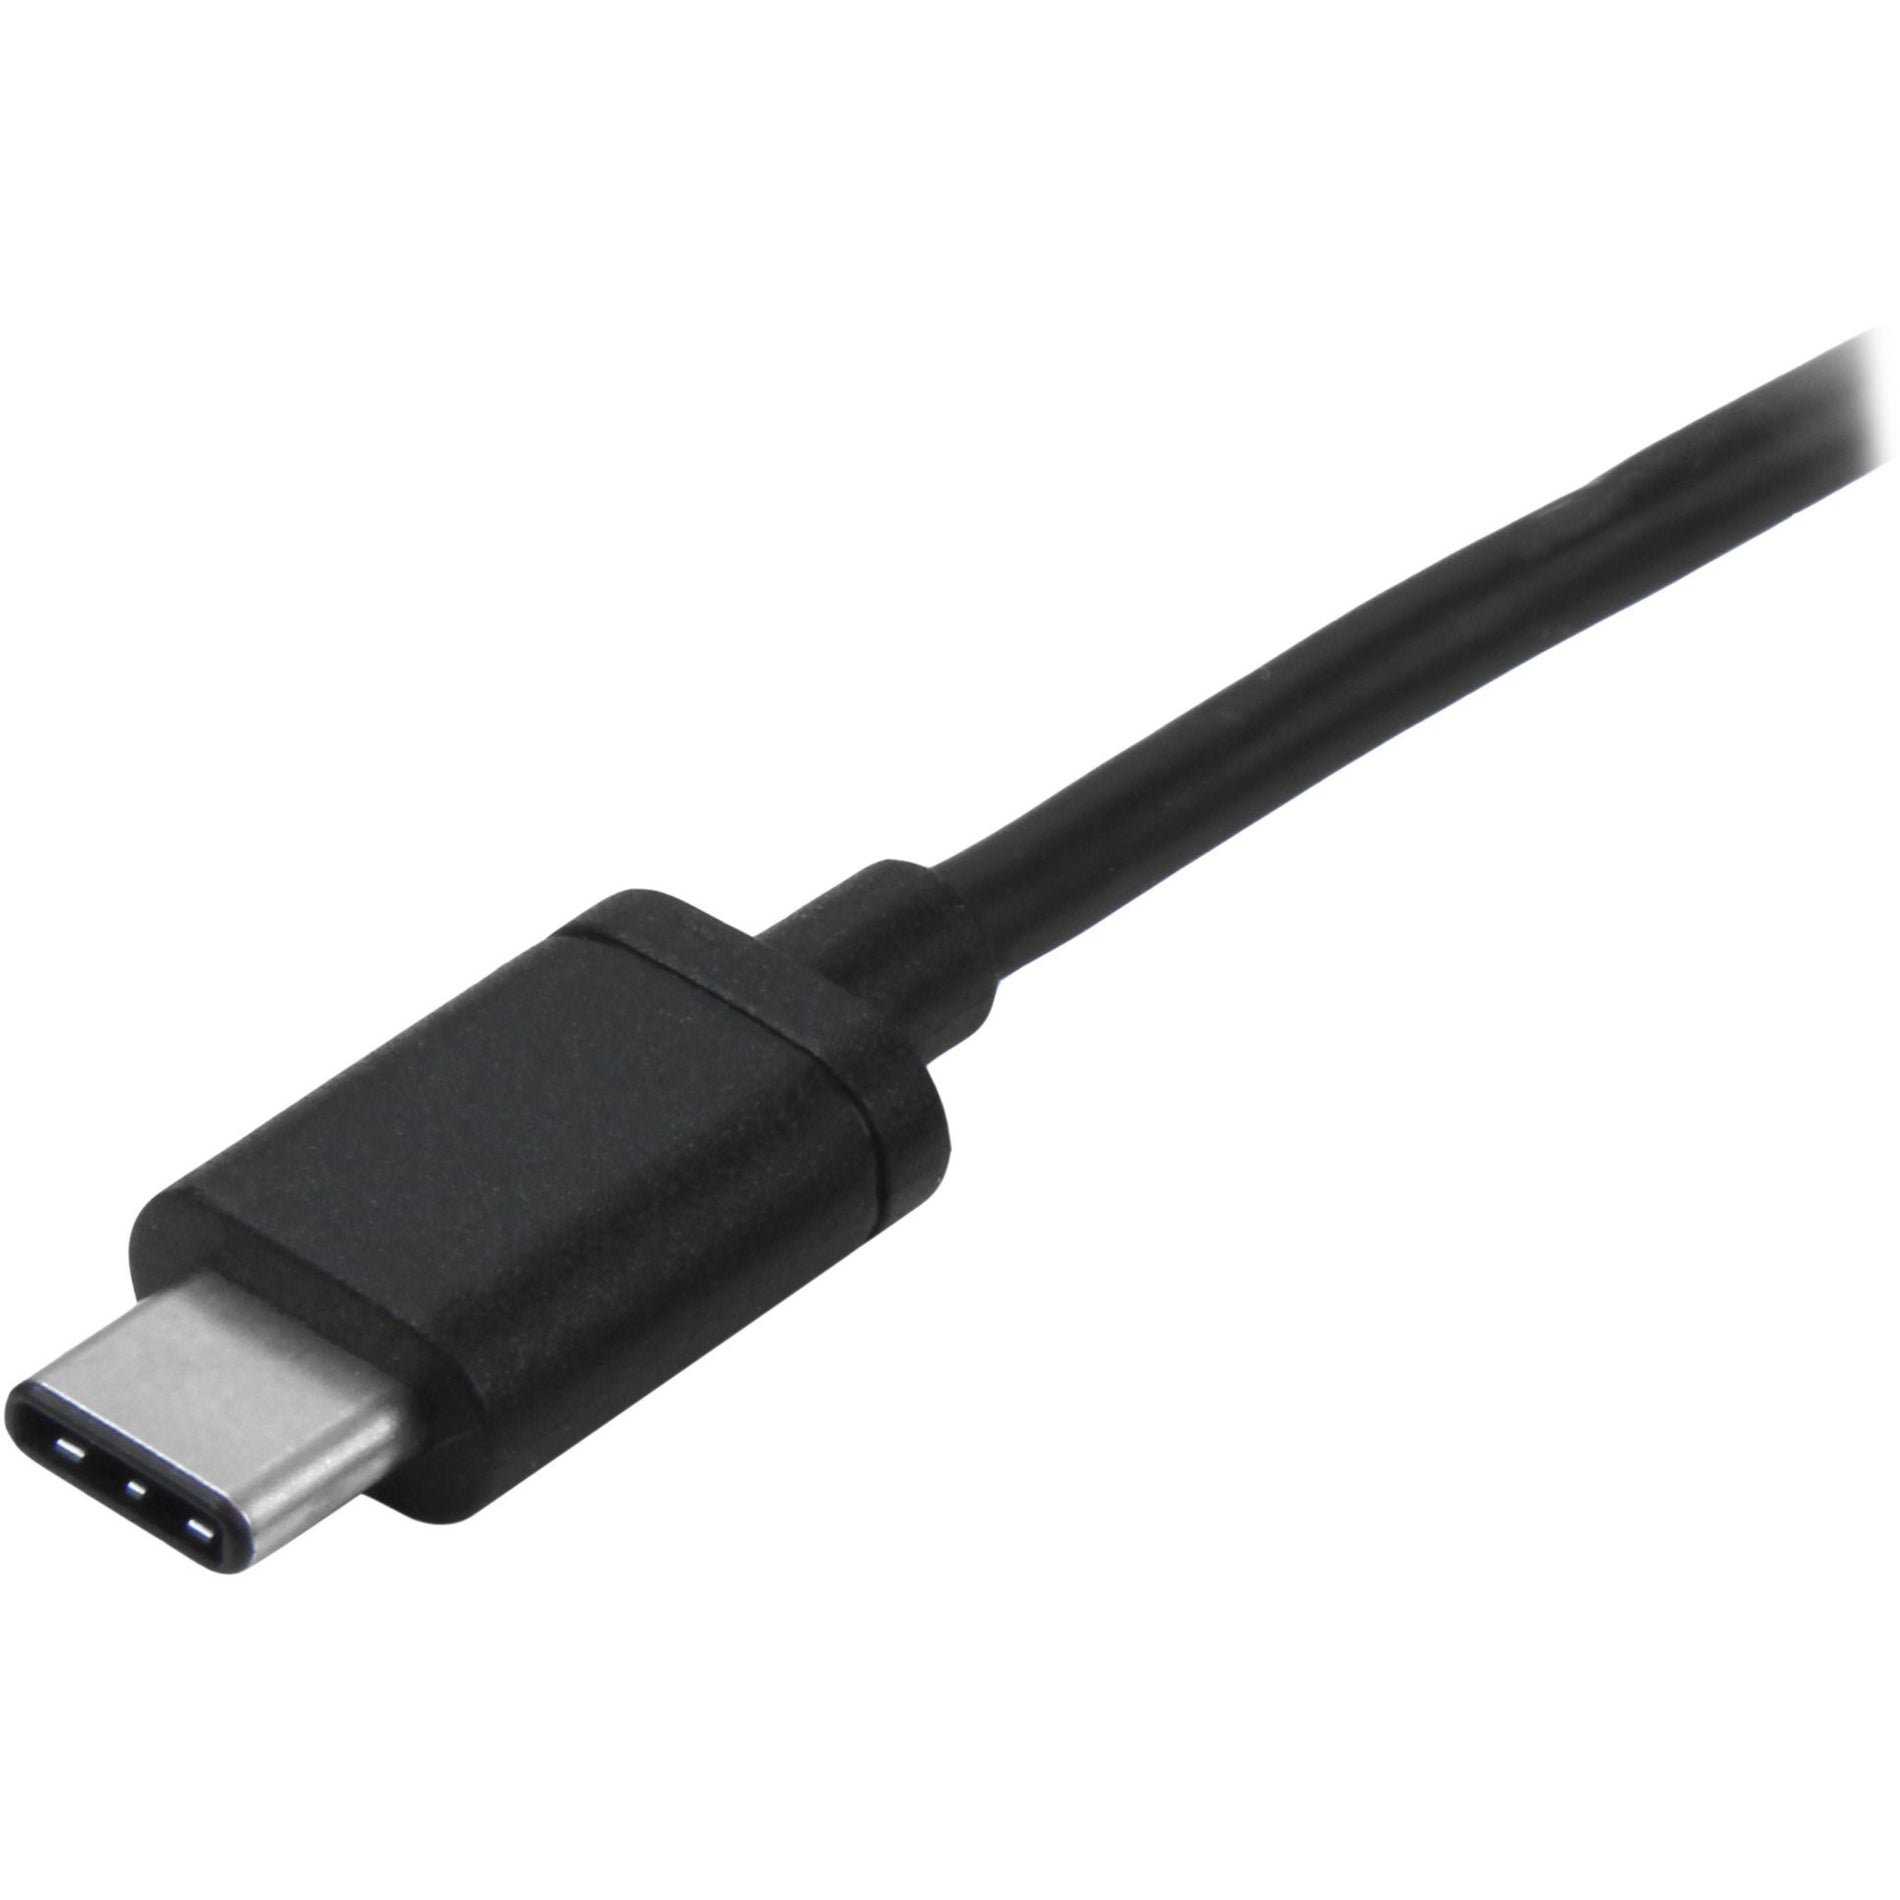 StarTech.com USB2CC2M USB-C Cable - M/M - 2m (6 ft.) - USB 2.0, Compatible with USB-C Laptops & Mobile Devices